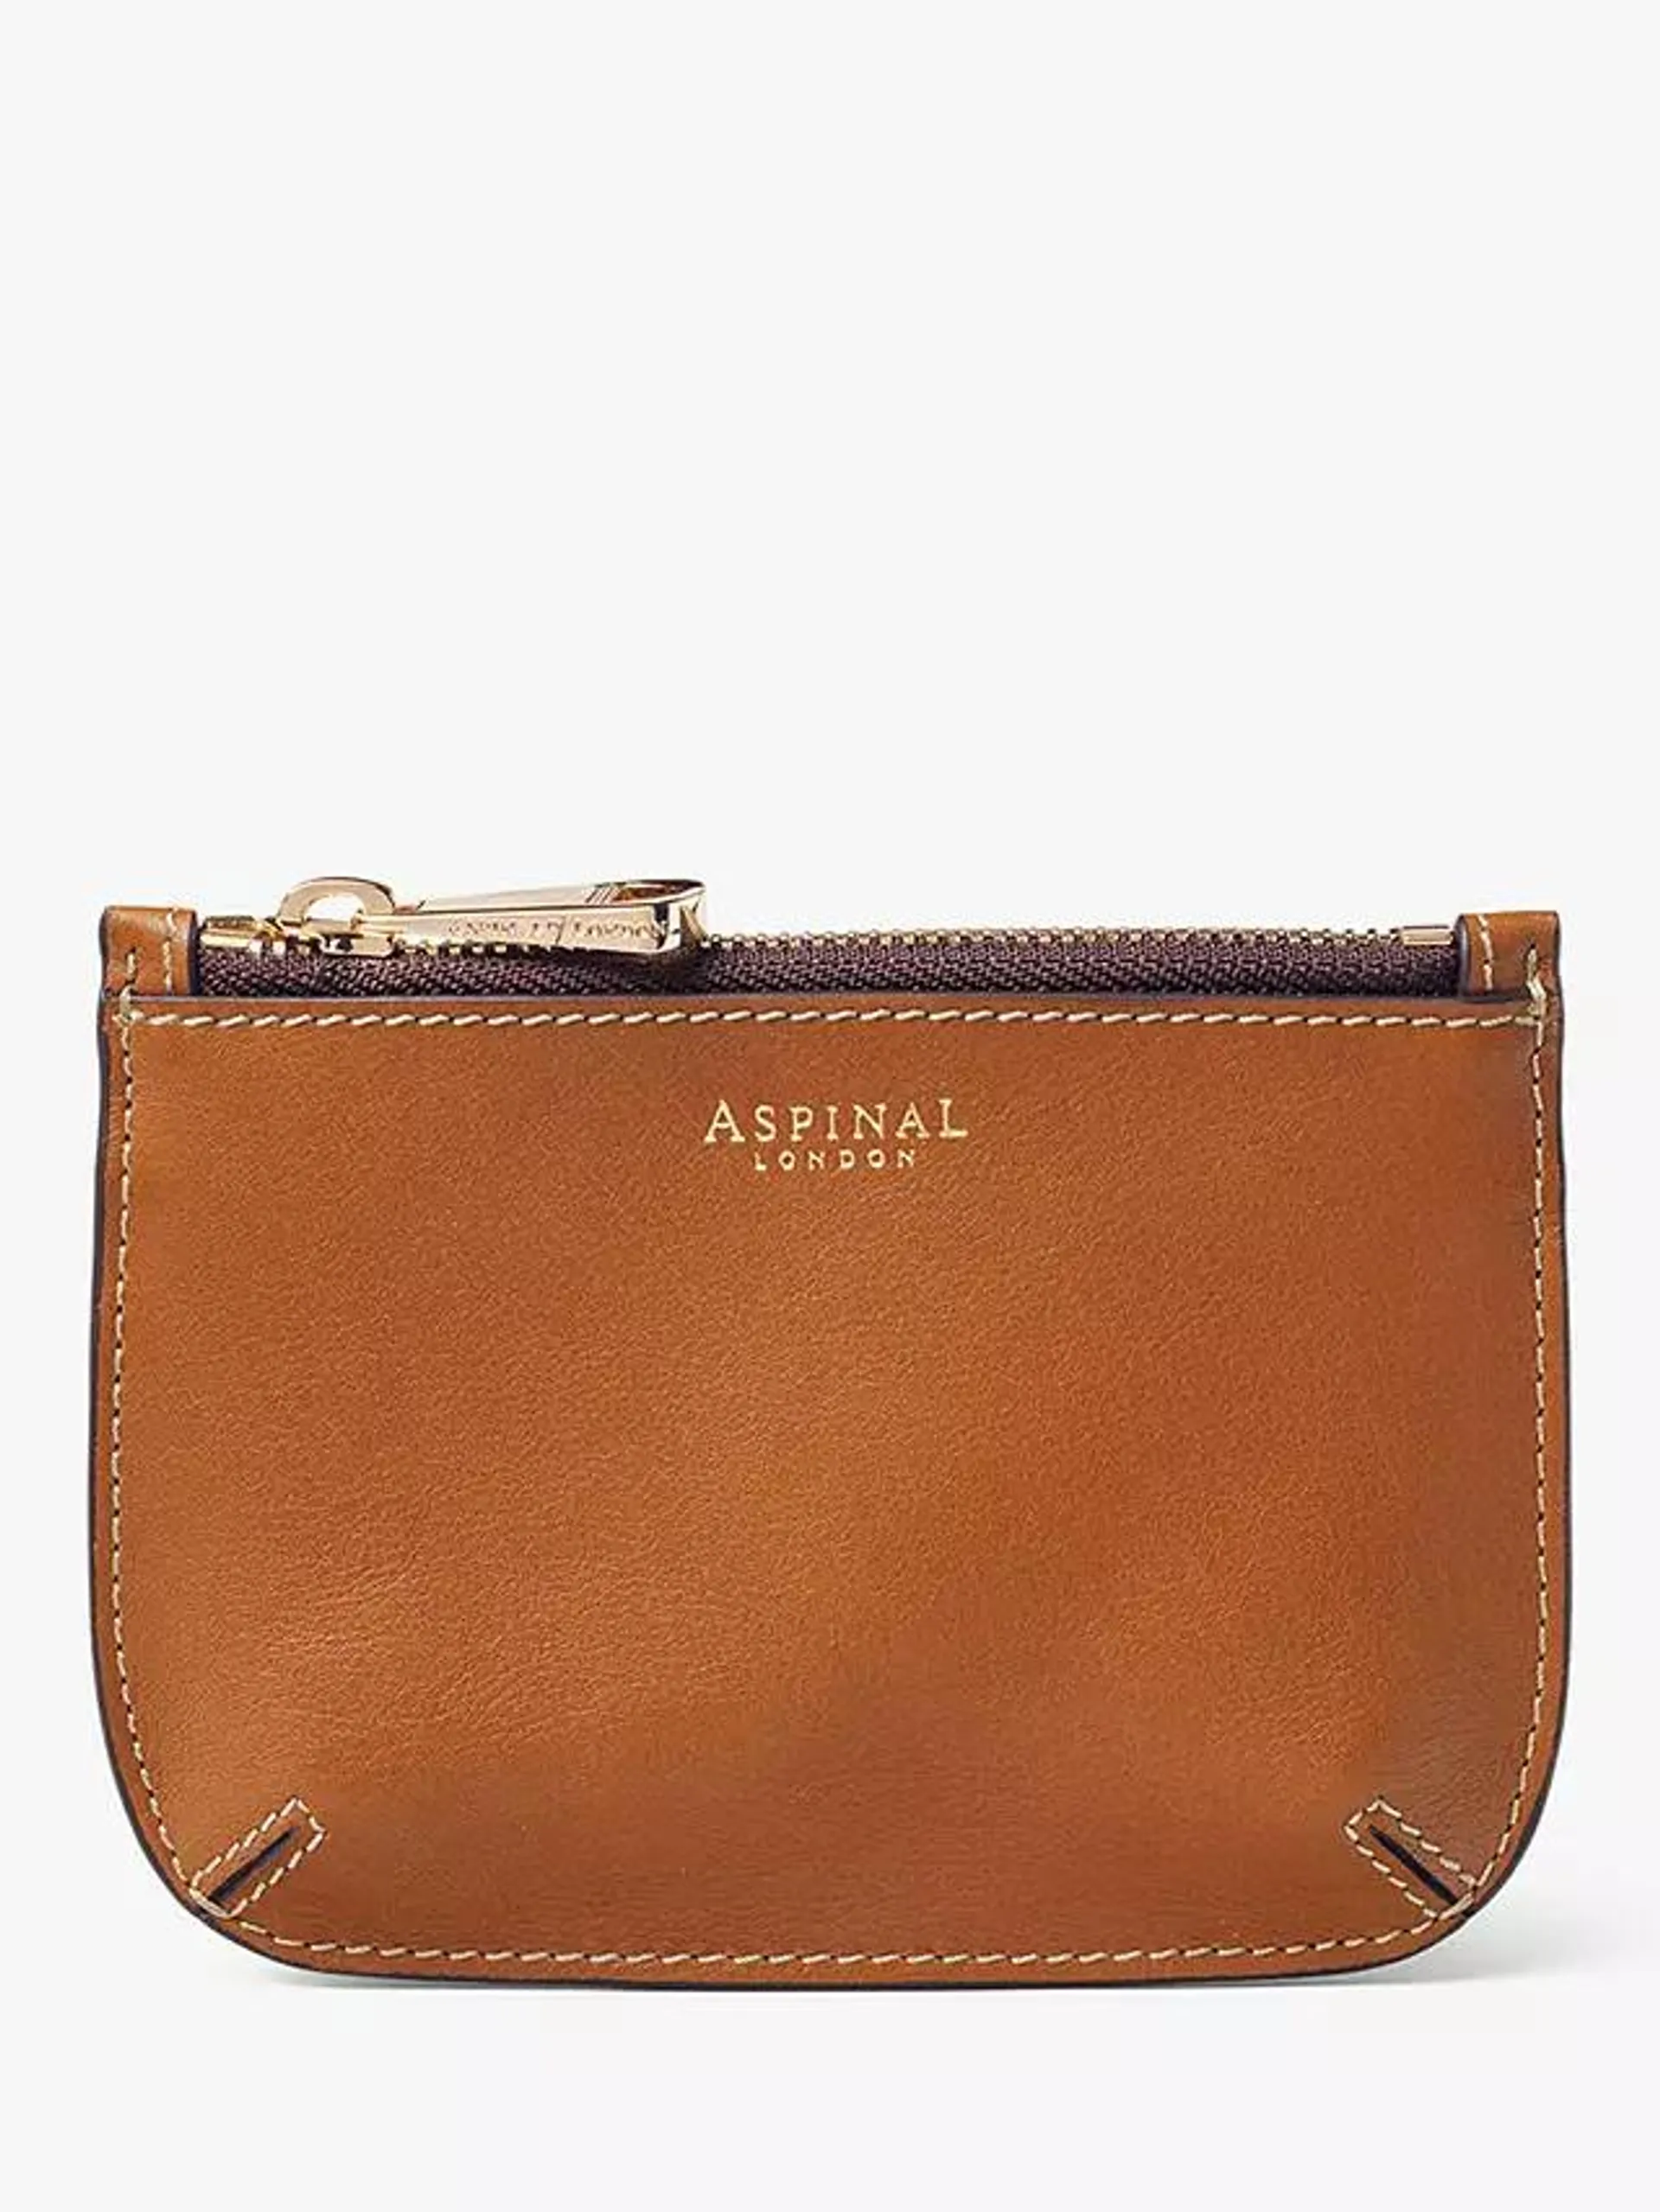 Aspinal of London Ella Smooth Leather Small Pouch Purse, Tan